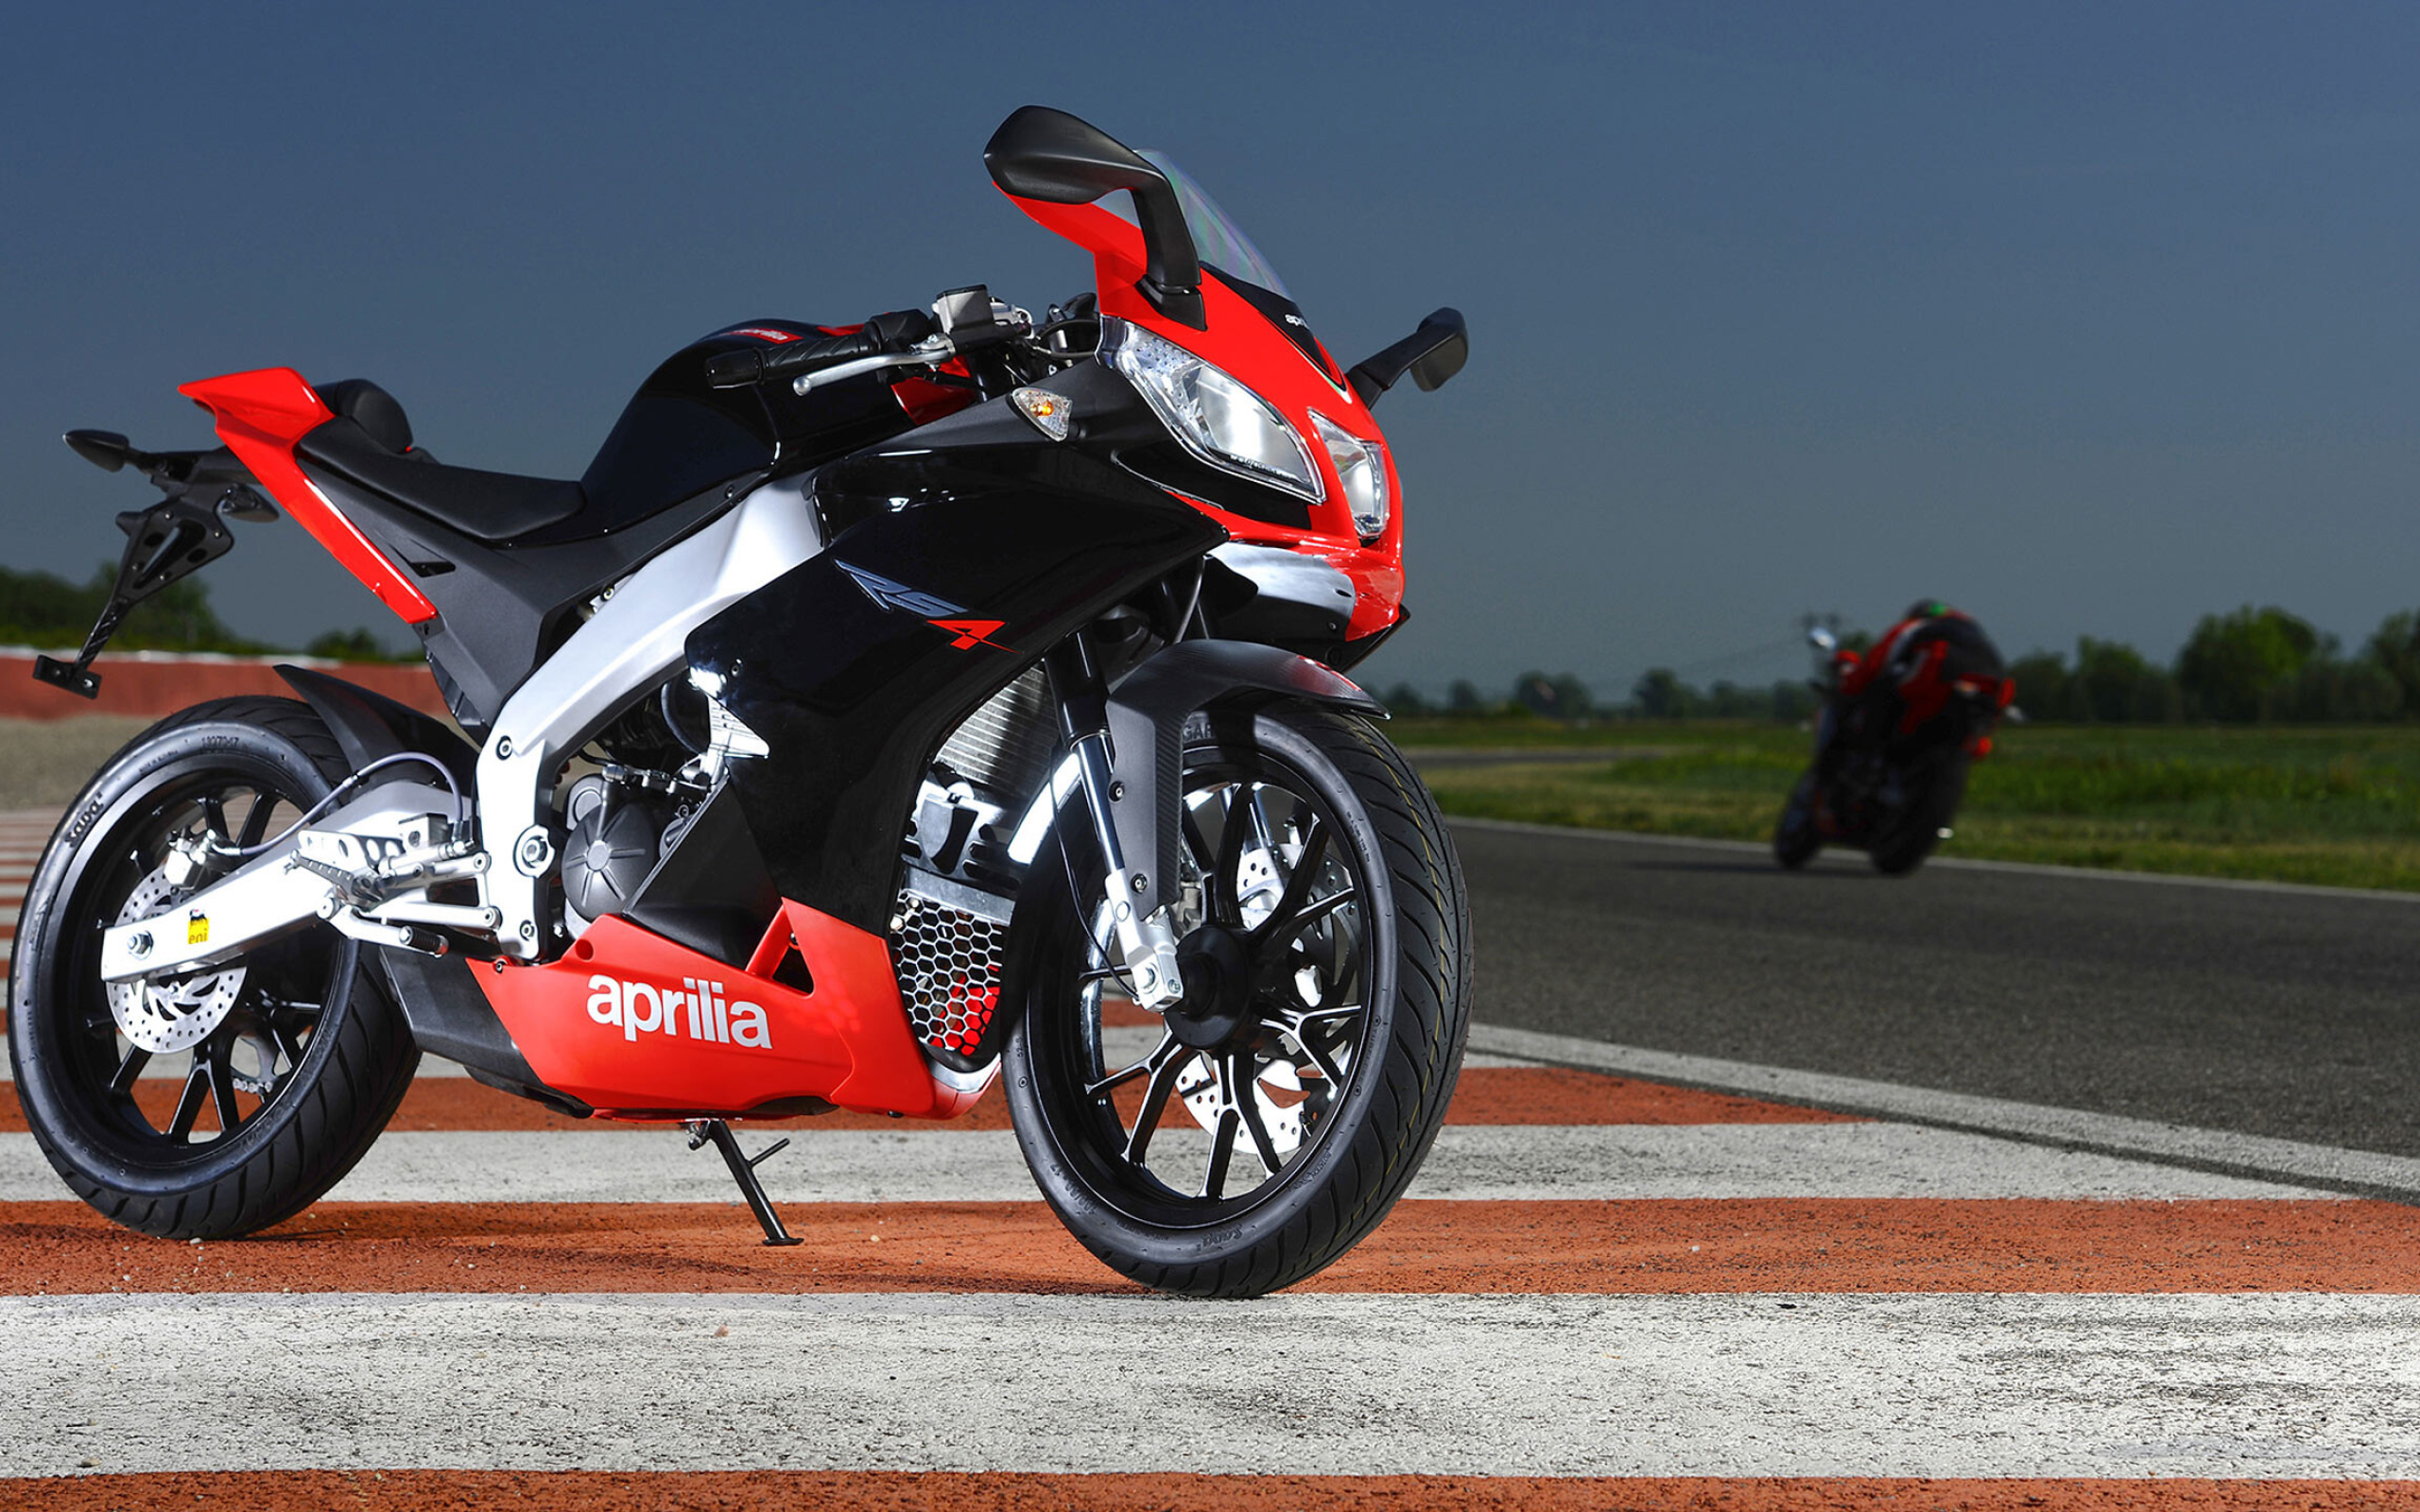 Aprilia: RS4 125, A 125 cc class sportbike manufactured by Italian motorcycle firm. 2560x1600 HD Background.